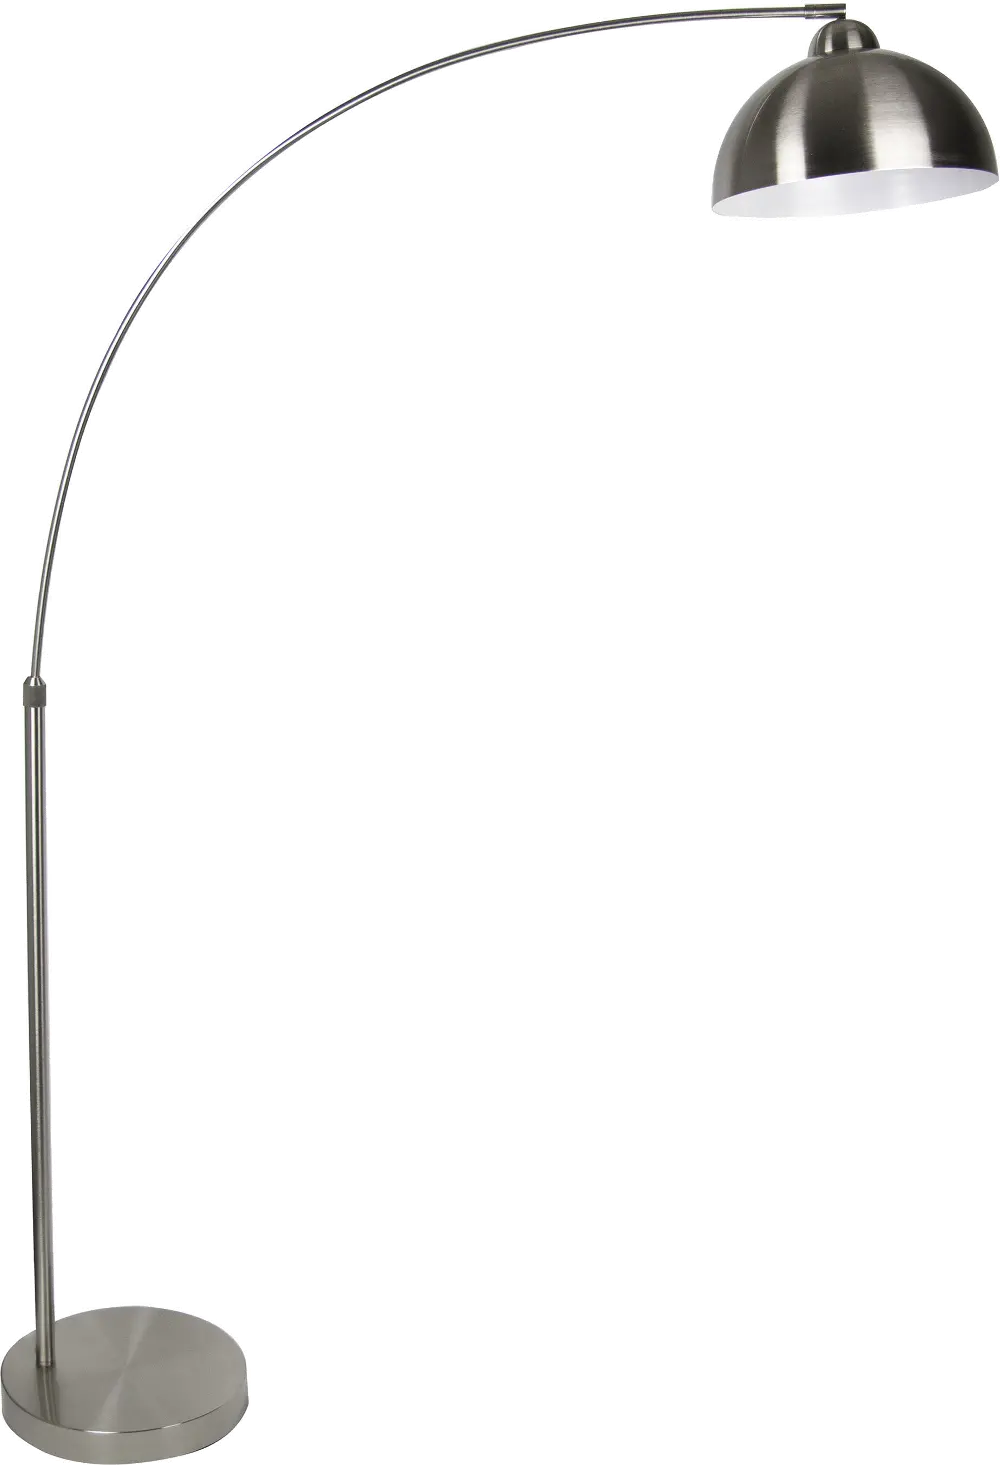 FL68-DARBY-DBL NI Darby Brushed Nickel Arched Floor Lamp-1